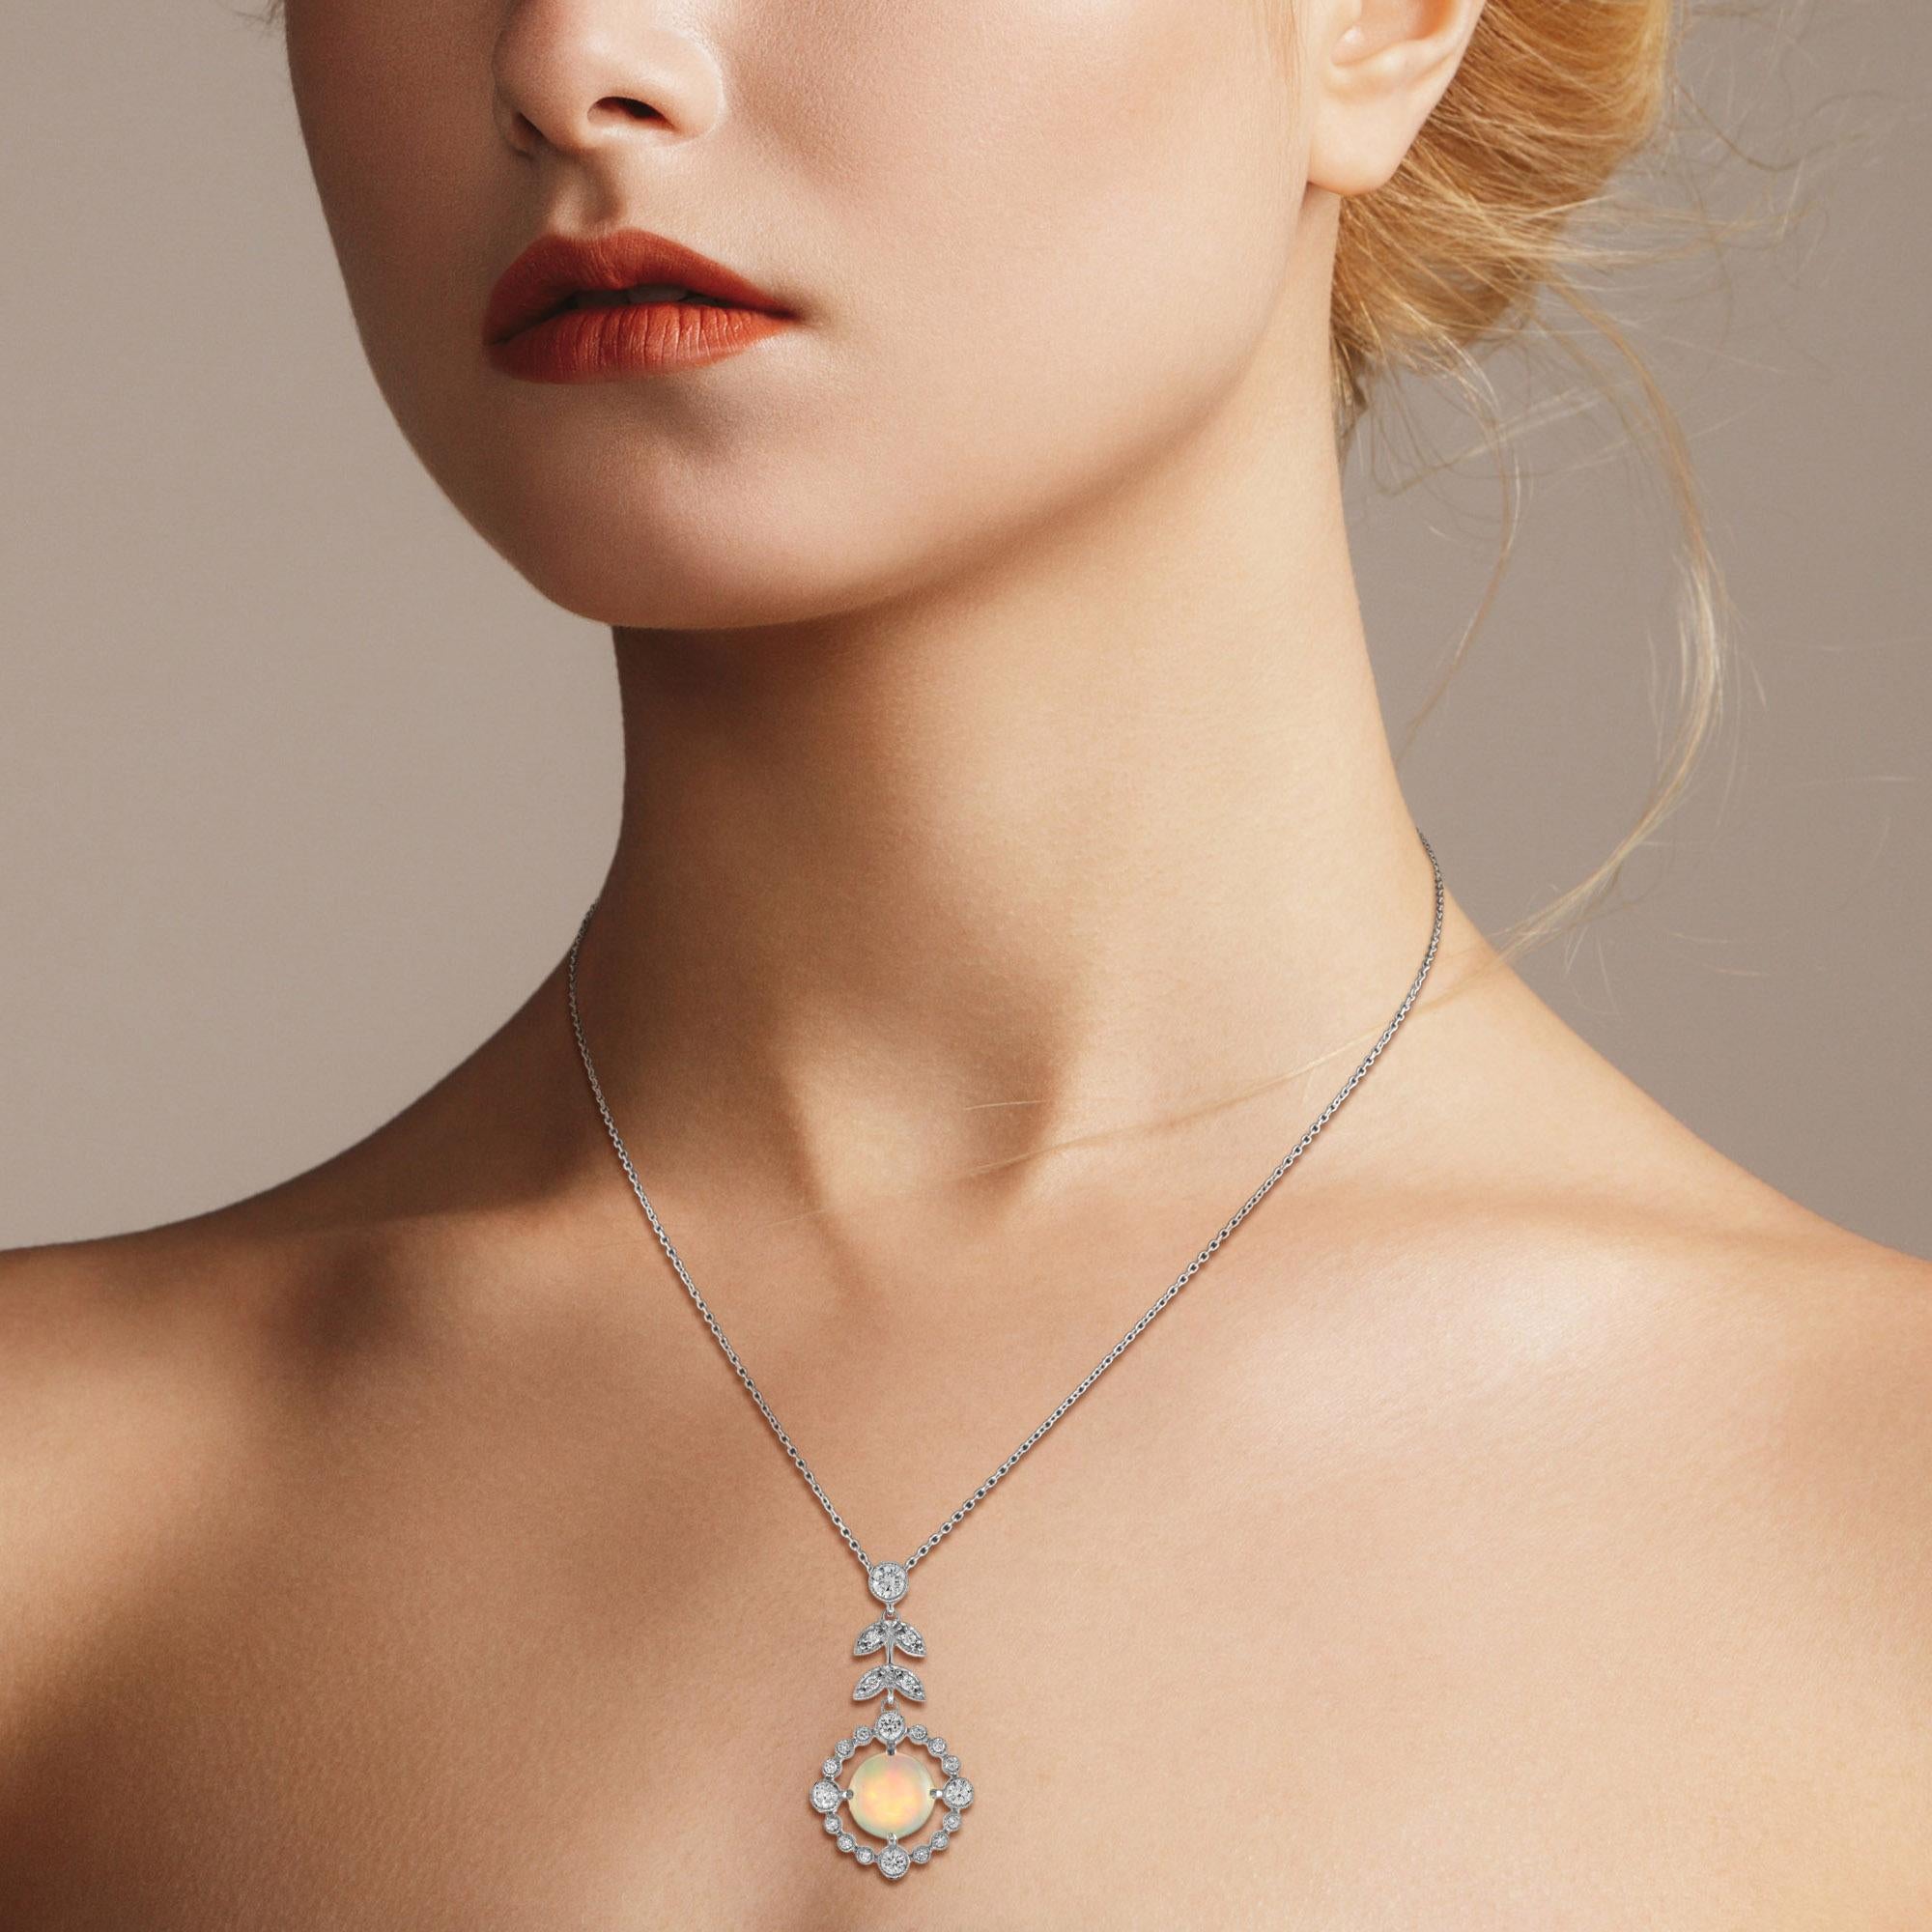 This dainty Ethiopian Opal and Diamond Necklace features beautiful flashes of playful colors that catch both eyes and hearts. The 18k gold and diamond claw setting protects and keep the precious opal gemstone in its place for the rest of eternity.